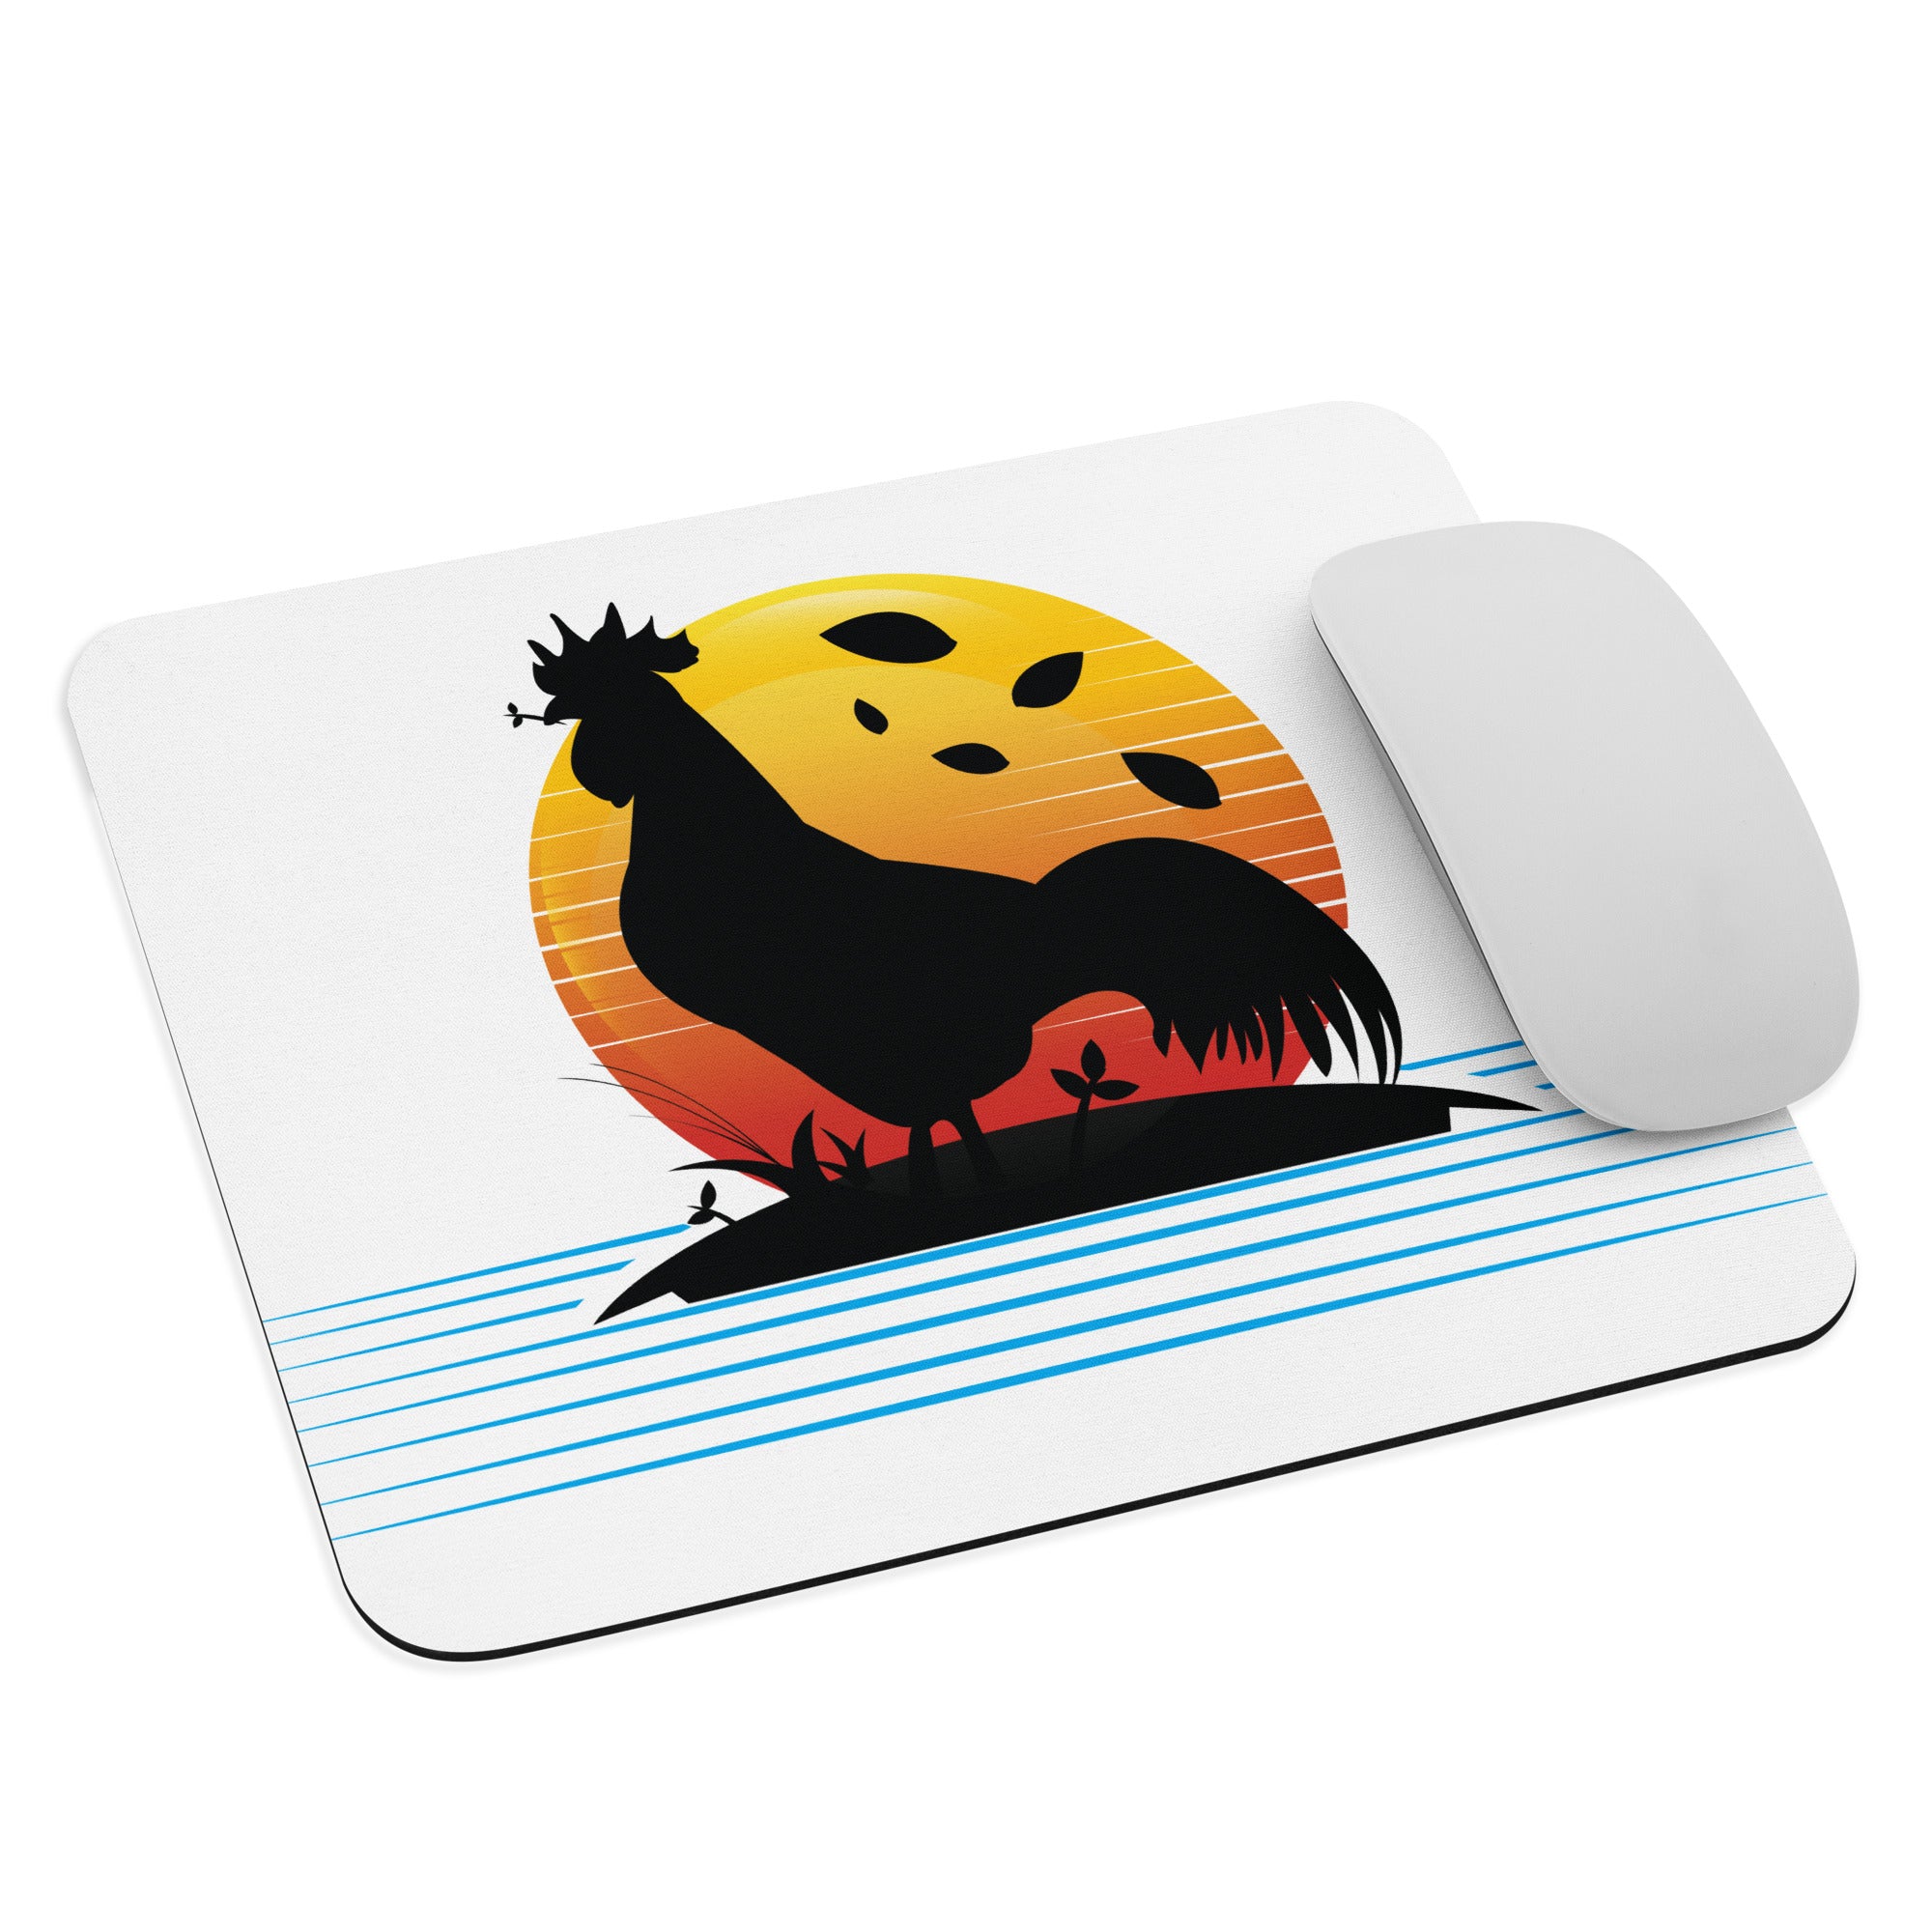 Mouse pad, Mouse pad, Rooster Mouse Pad, Back to School